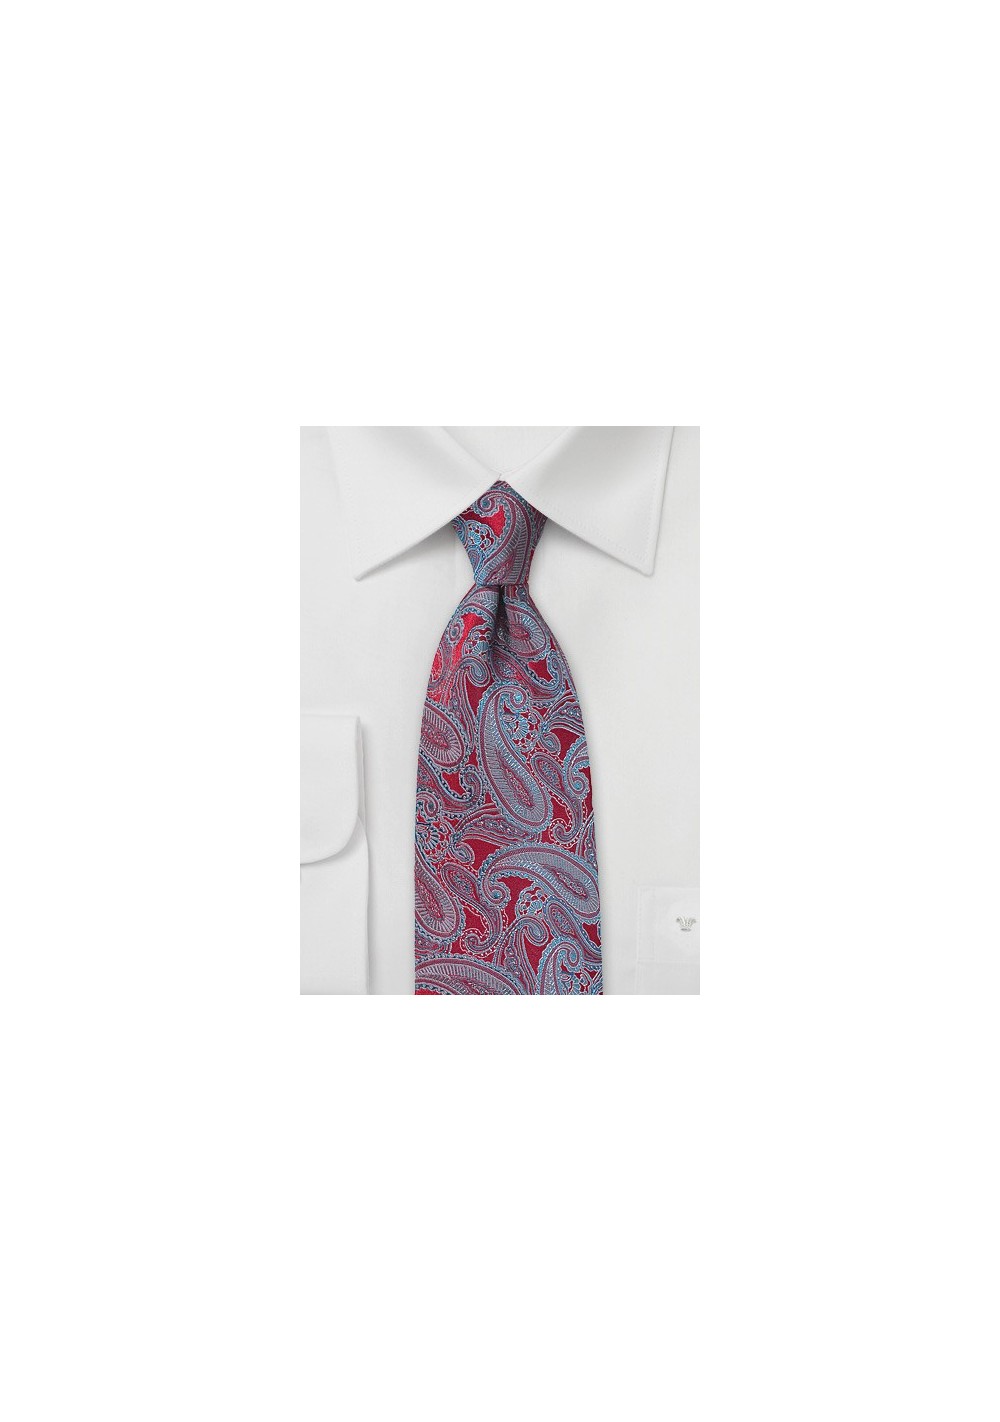 Red Necktie with Silver and Turquoise Paisleys